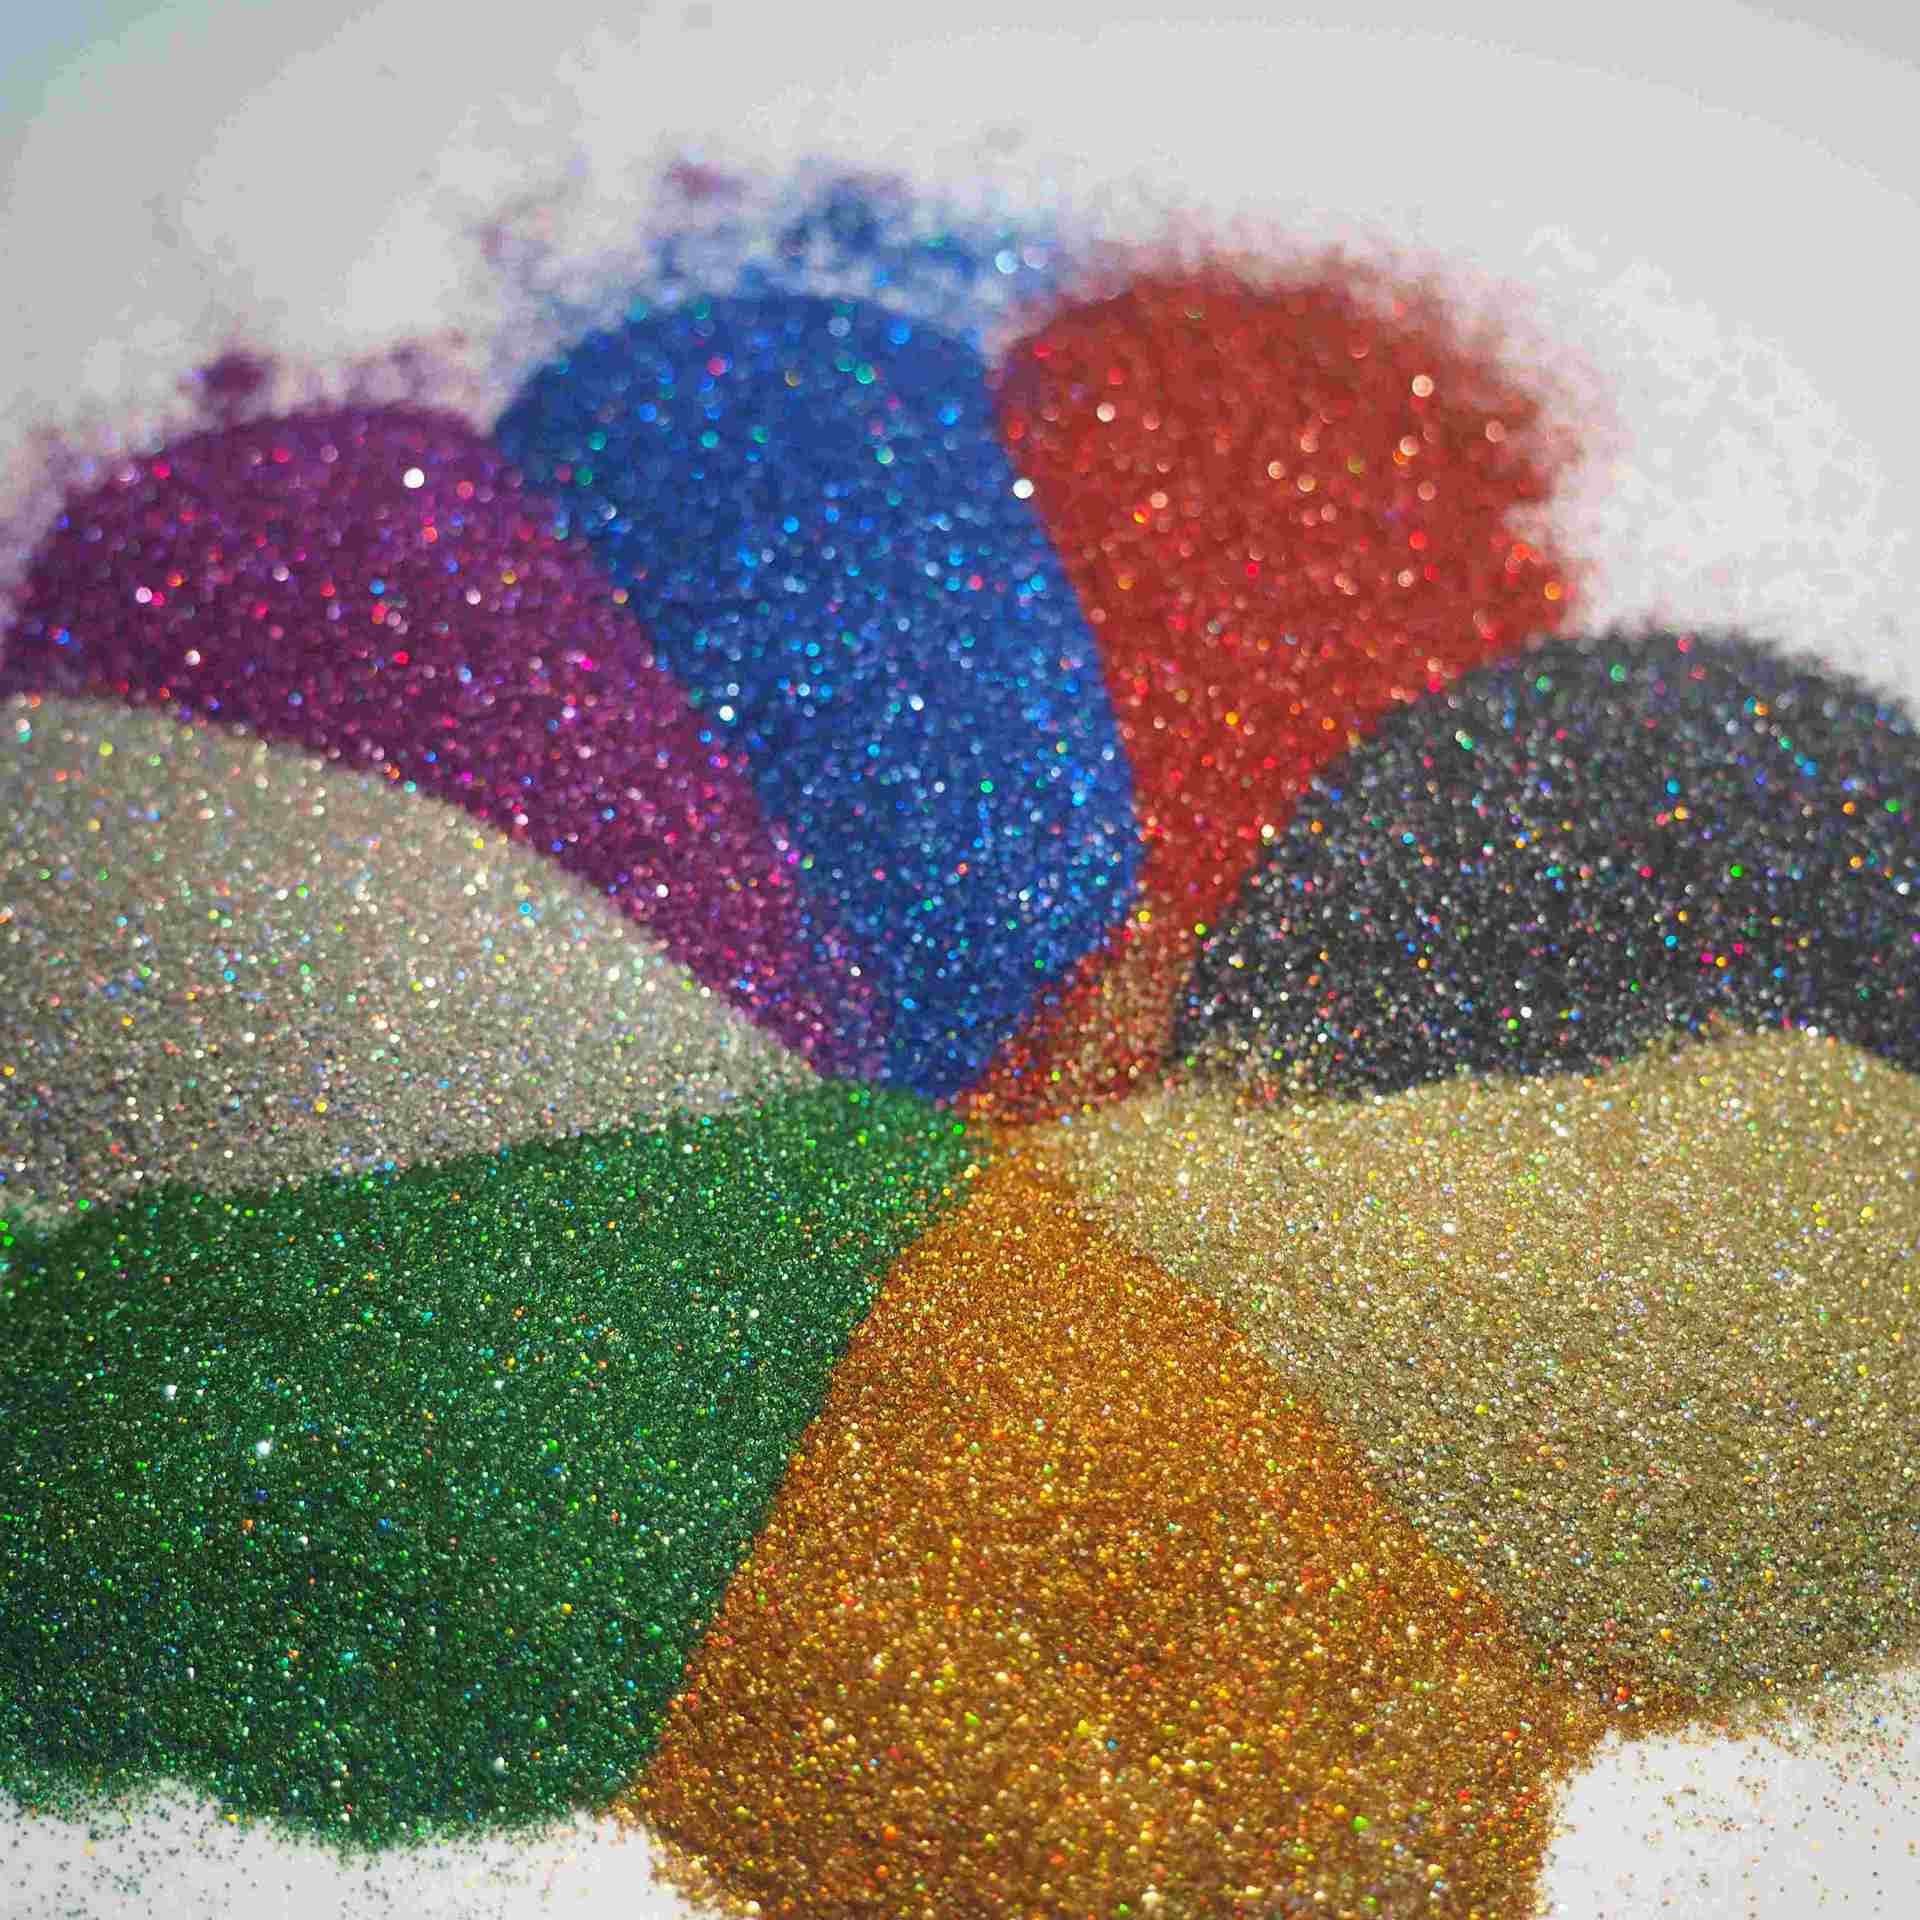 Factory Supply Colorful Wholesale Bulk Biodegradable Glitter Powder for Crafts chunky holographic Glitter